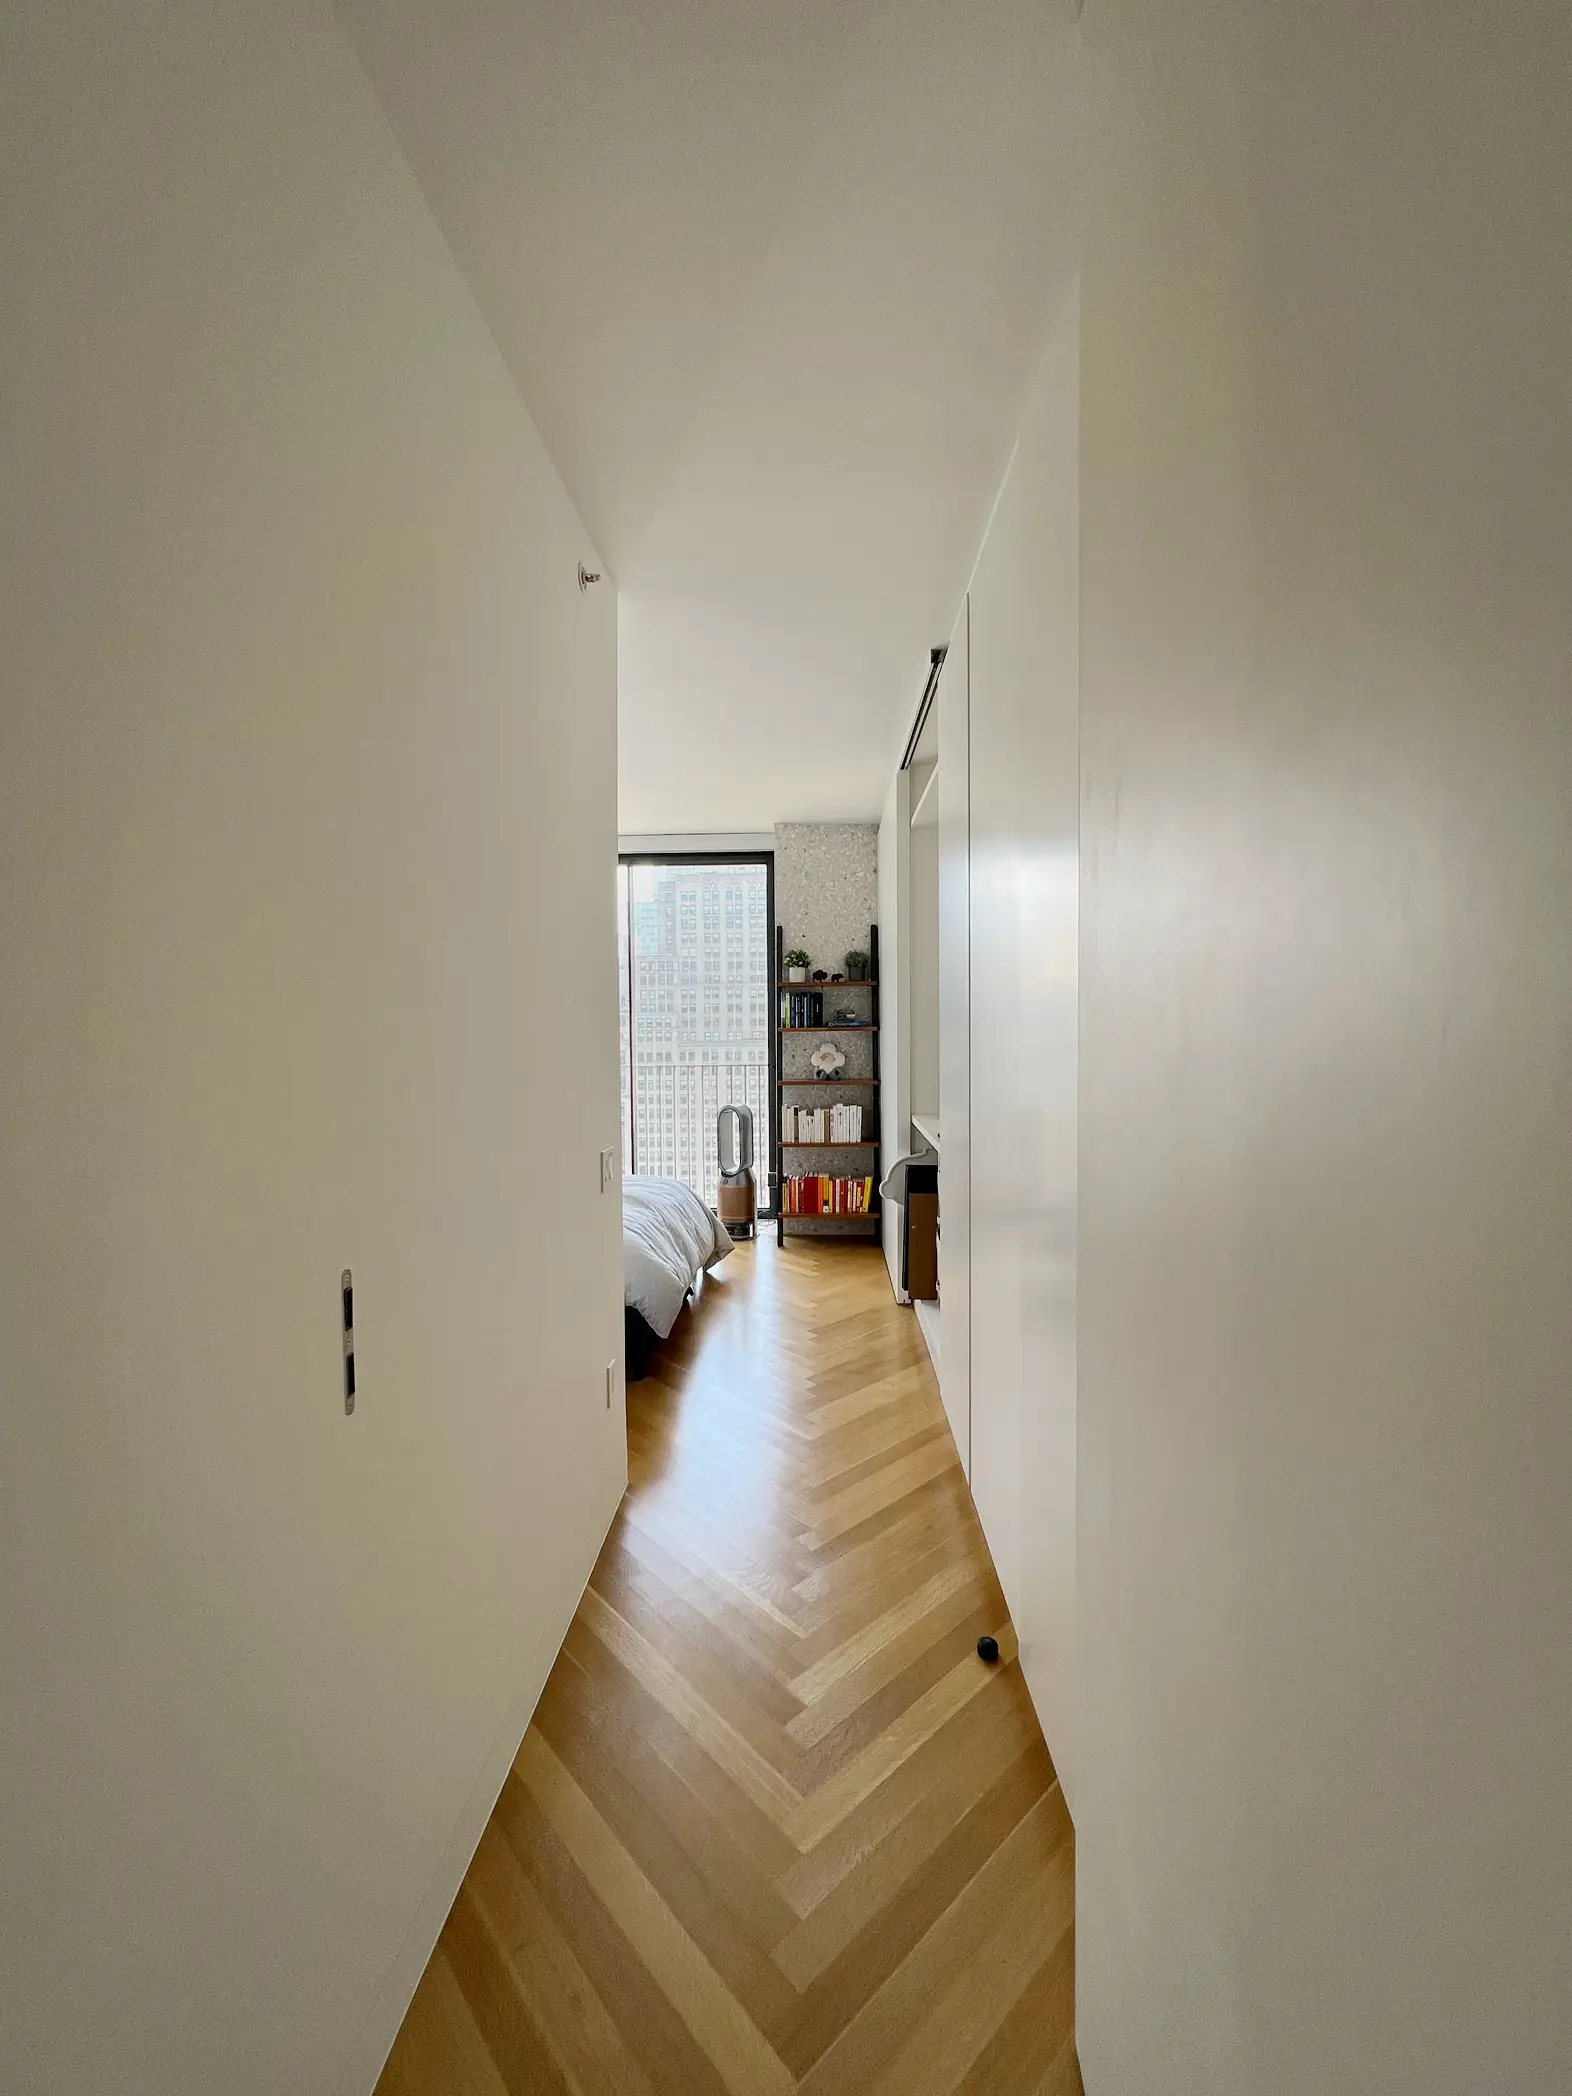  A hallway with a white door and a light on.